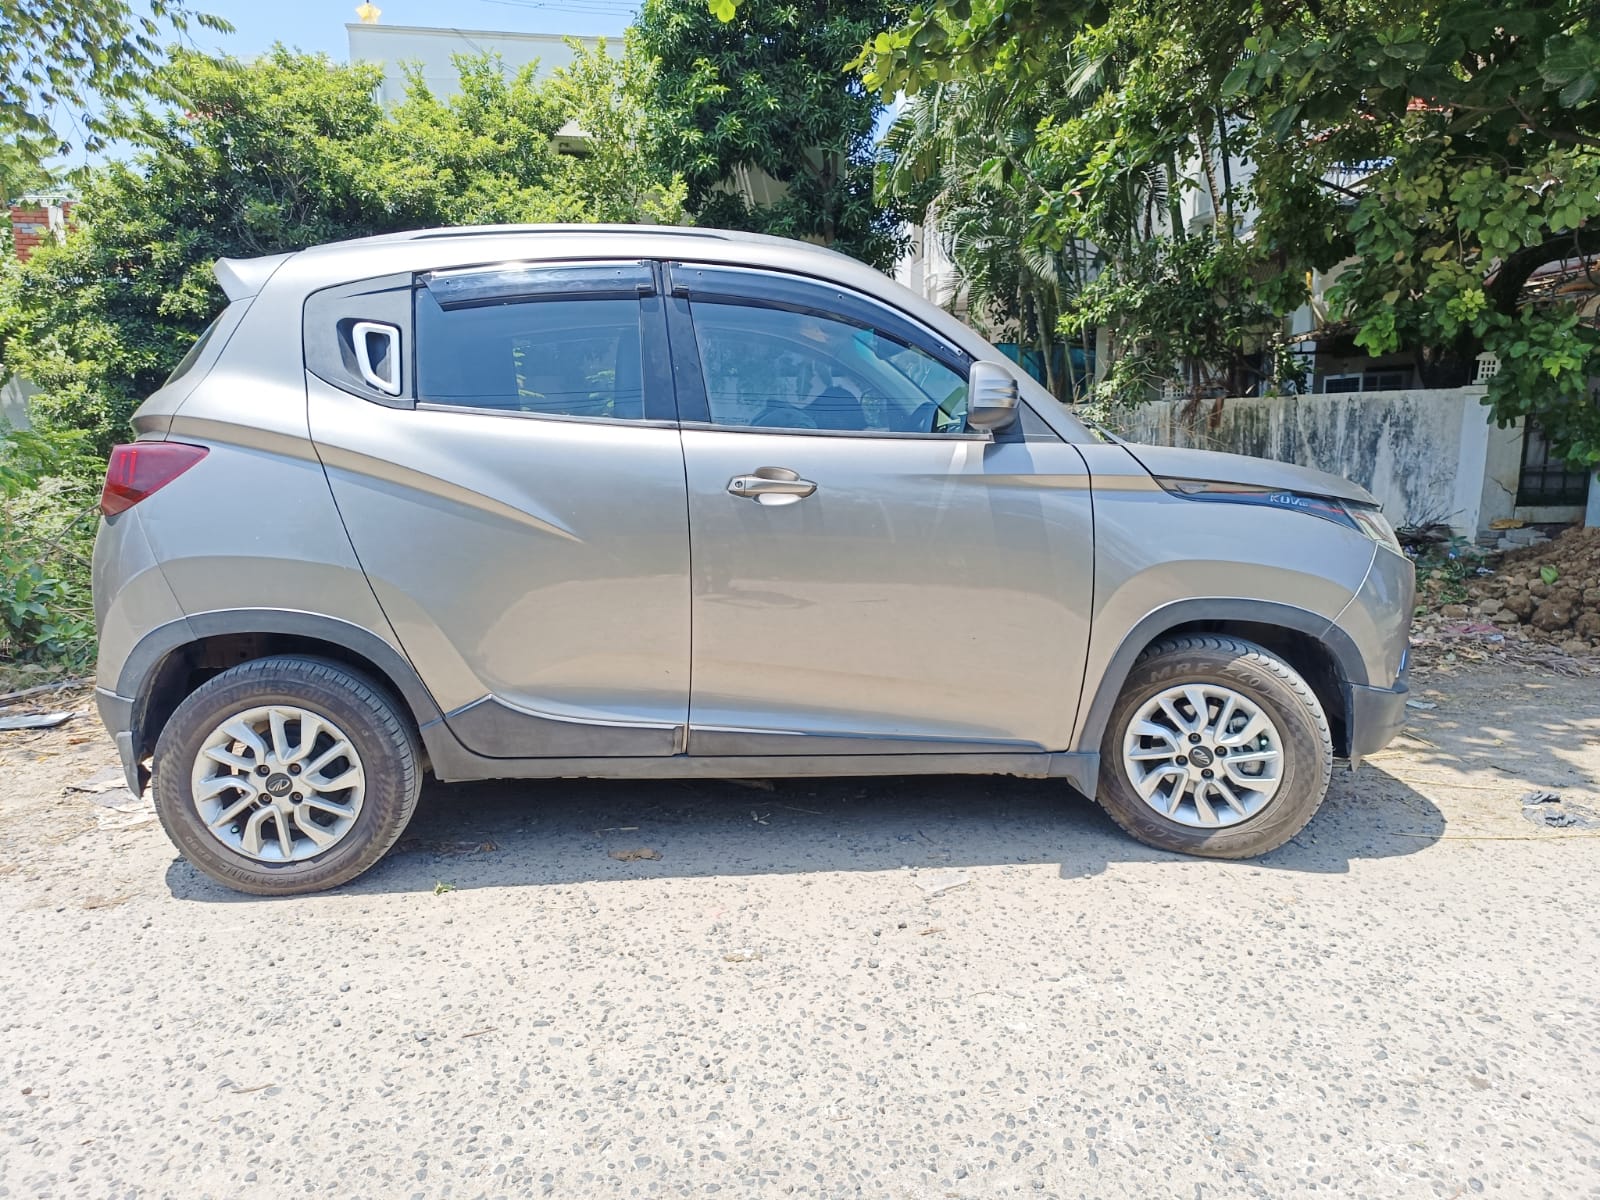 4290-for-sale-Mahindra-KUV-100-Diesel-First-Owner-2016-TN-registered-rs-375000